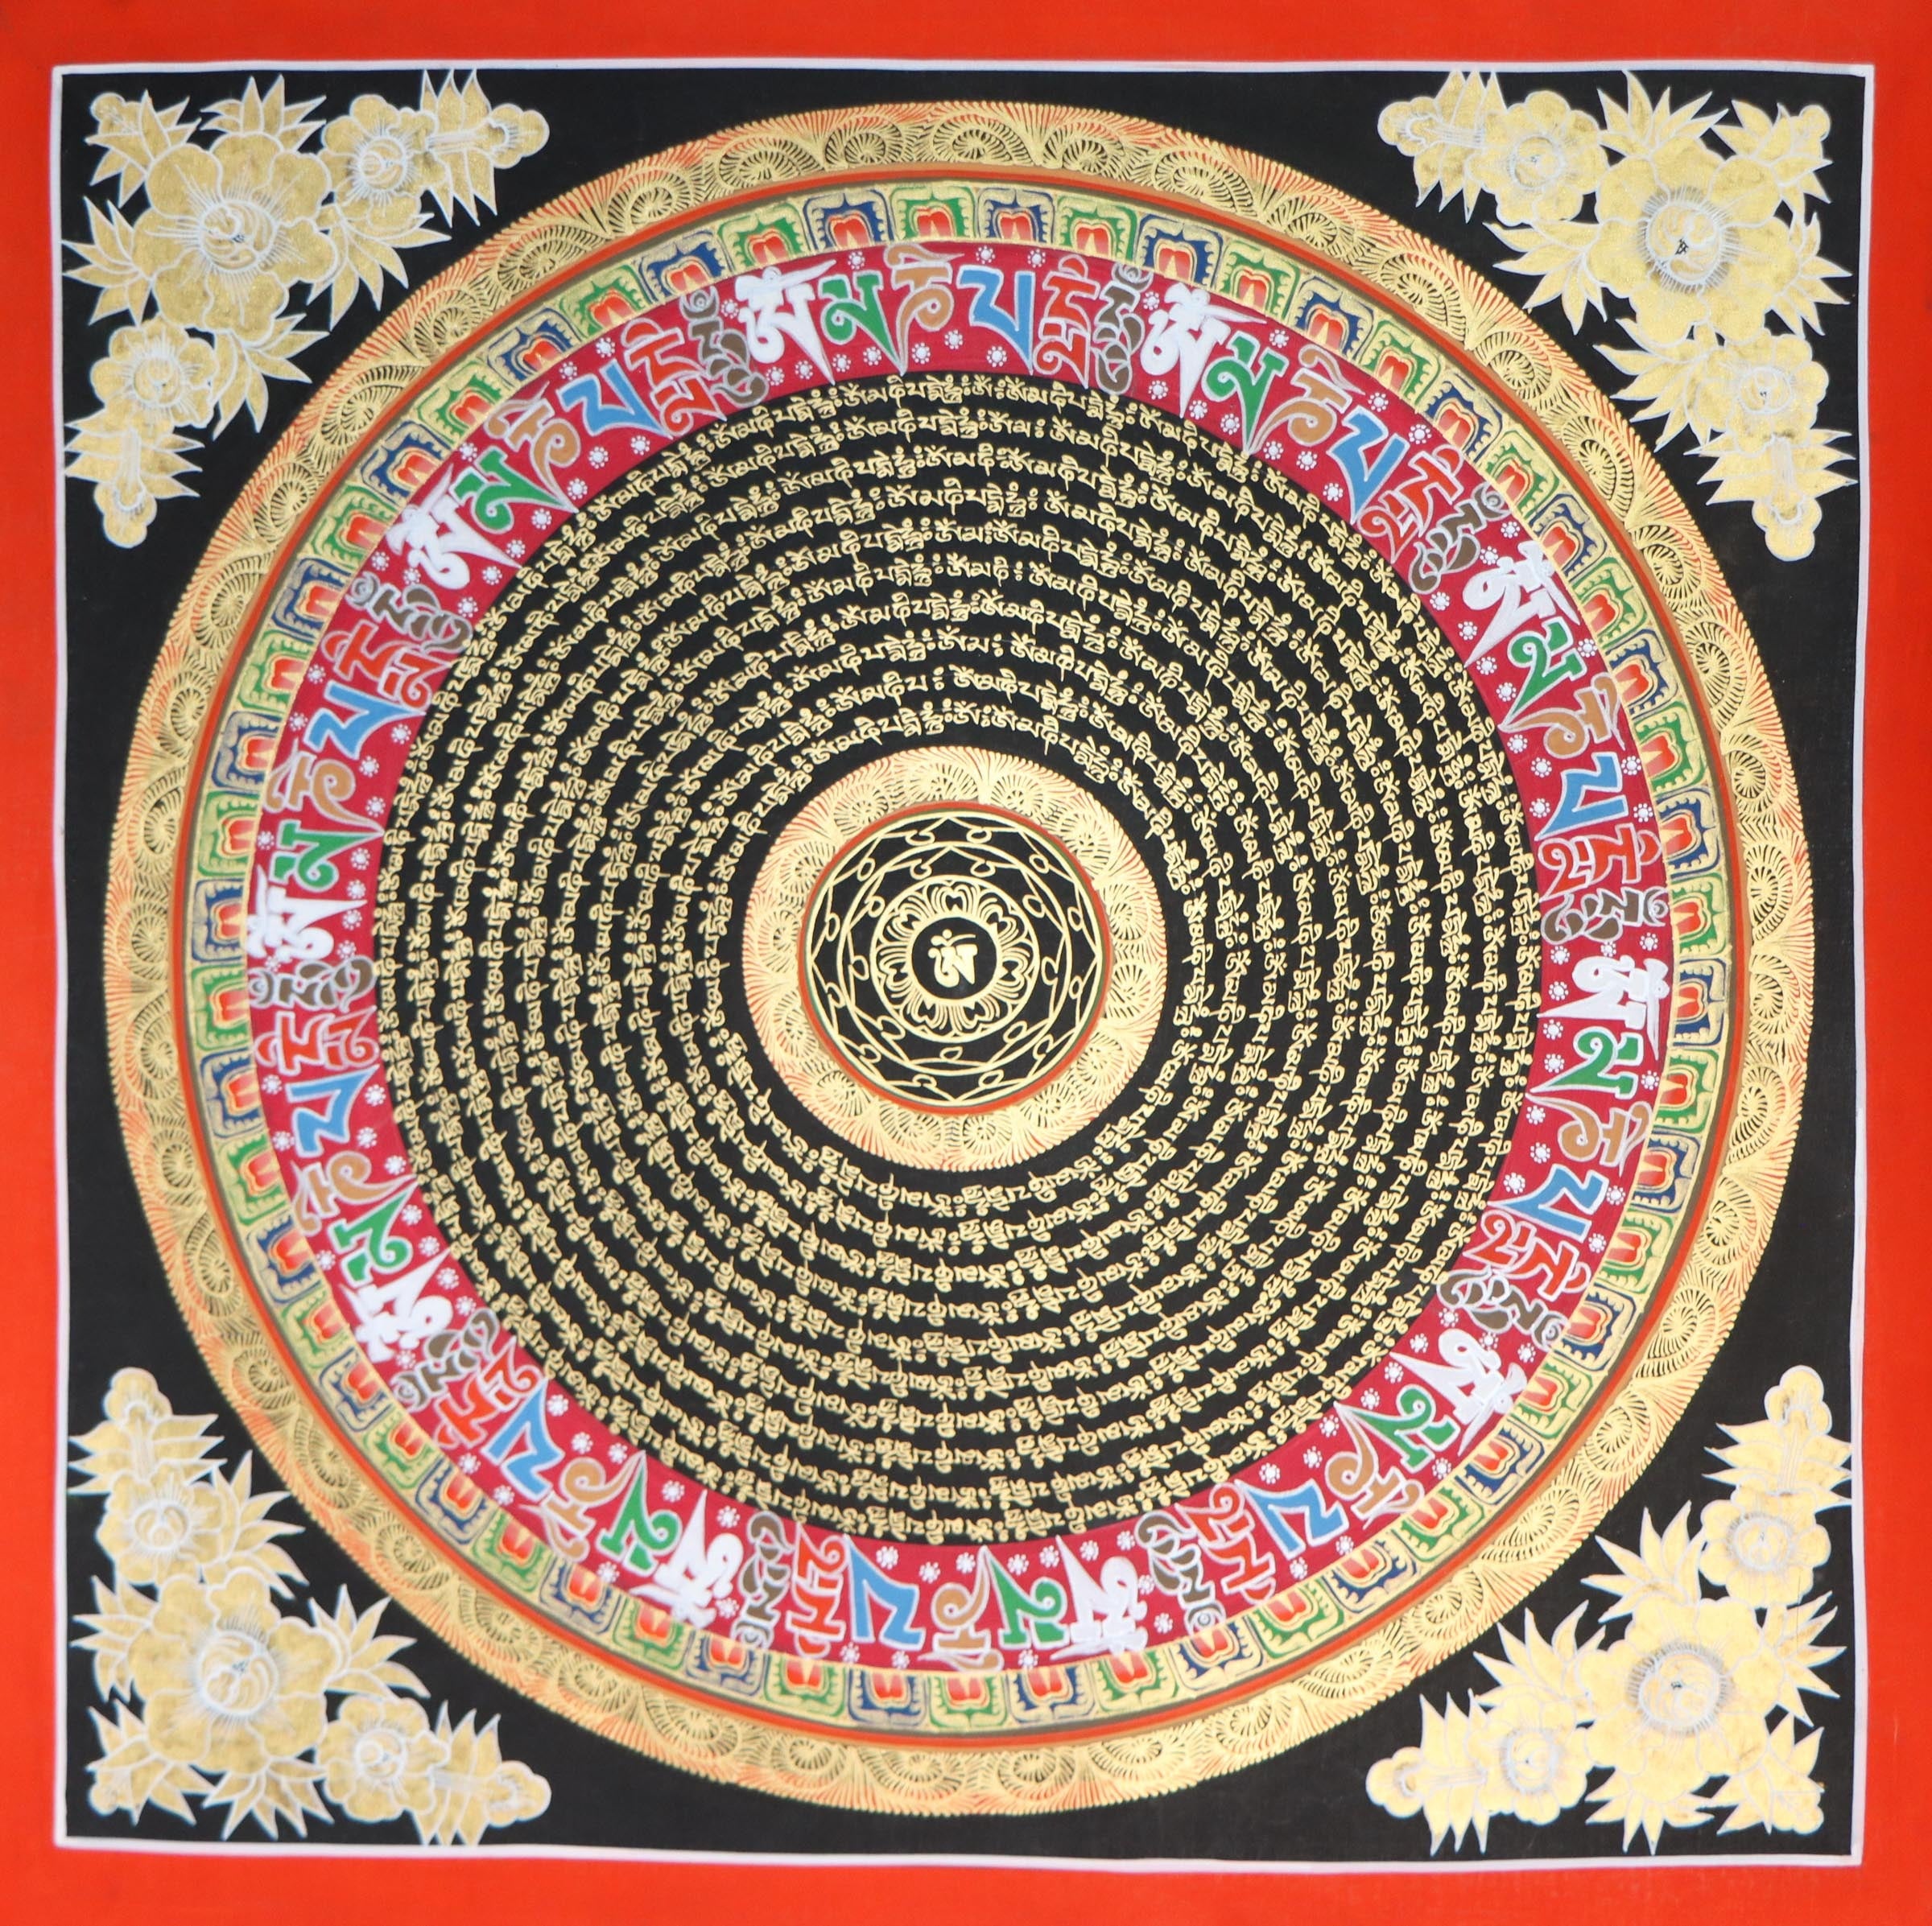 Black and Gold Mandala large size for home decor - Tibetan Thangka for good luck and positive enrgy